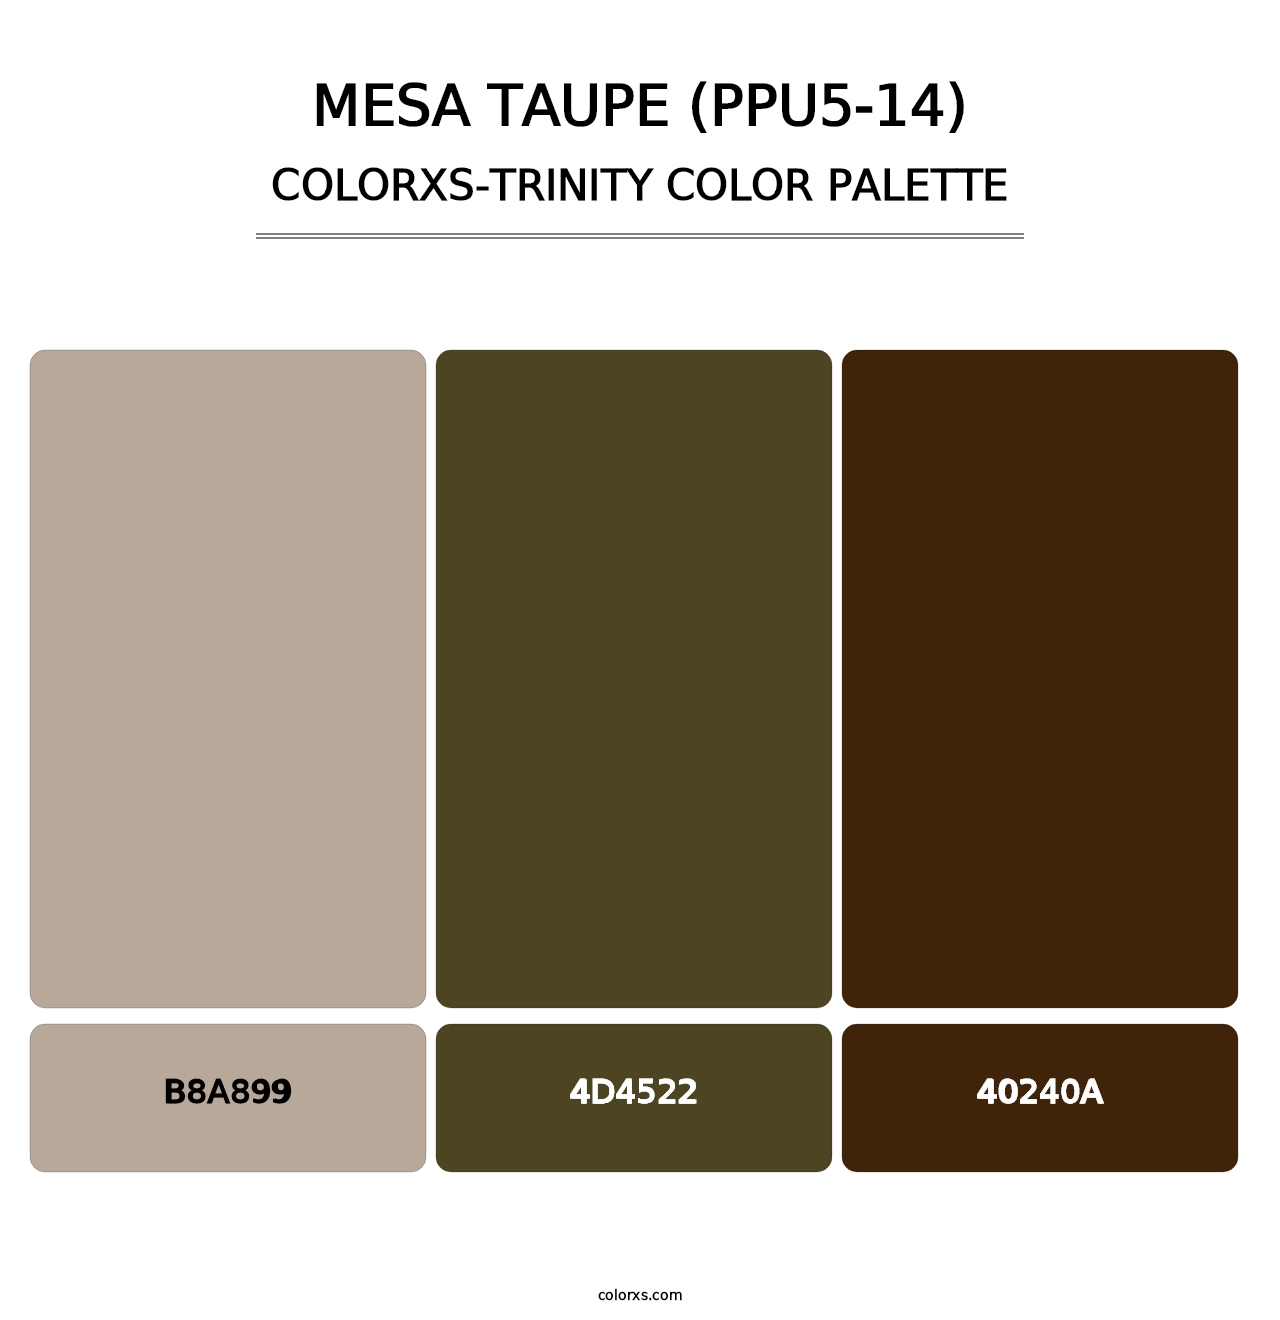 Mesa Taupe (PPU5-14) - Colorxs Trinity Palette